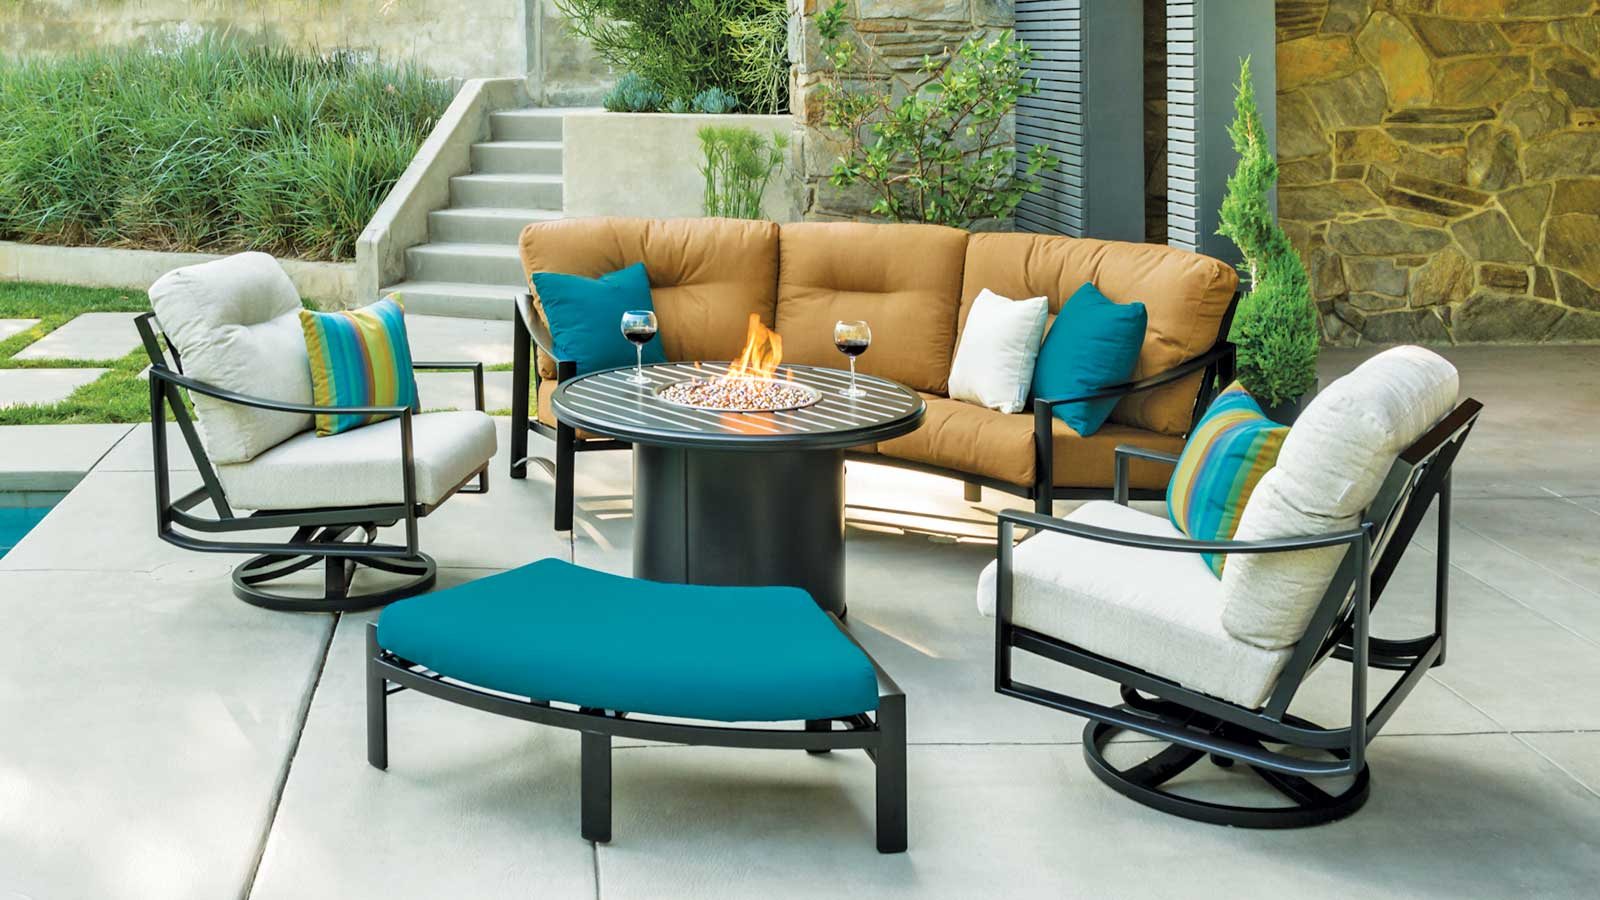 Outdoor Furniture Vancouver Coquitlam Burna Endless within dimensions 1600 X 900